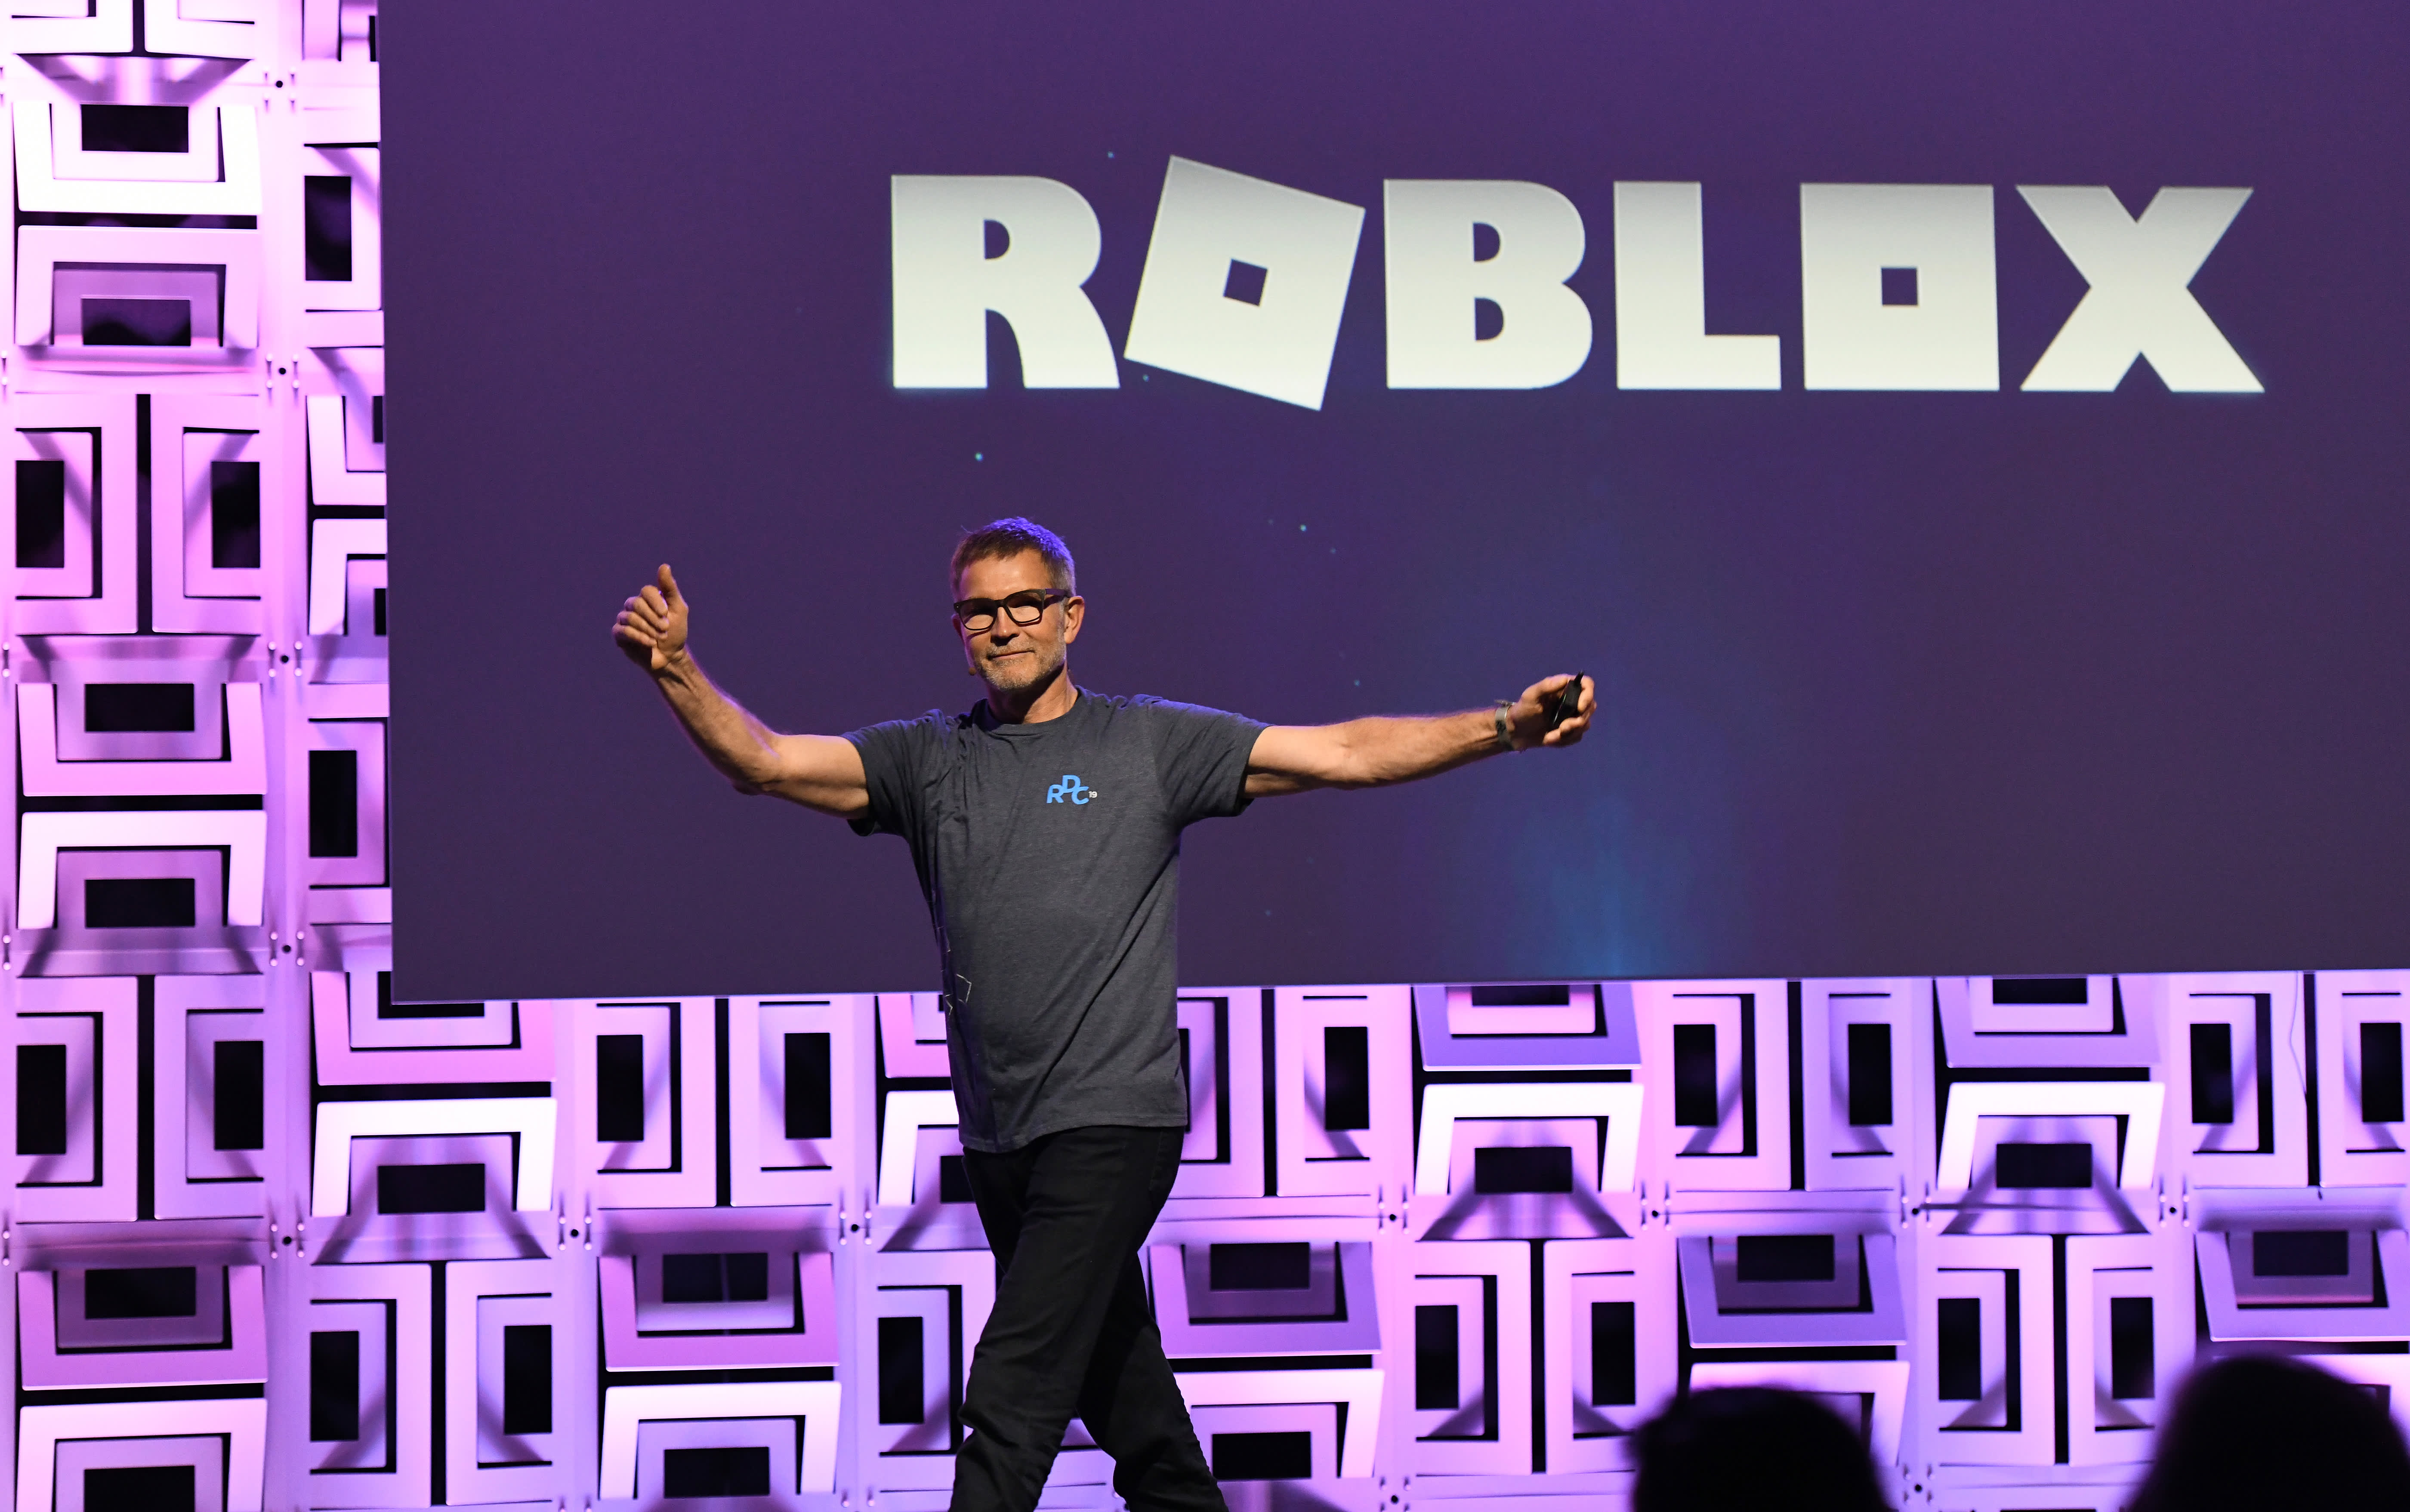 Roblox CEO is worth $ 4.6 billion and participation in the Index is worth $ 3.7 billion